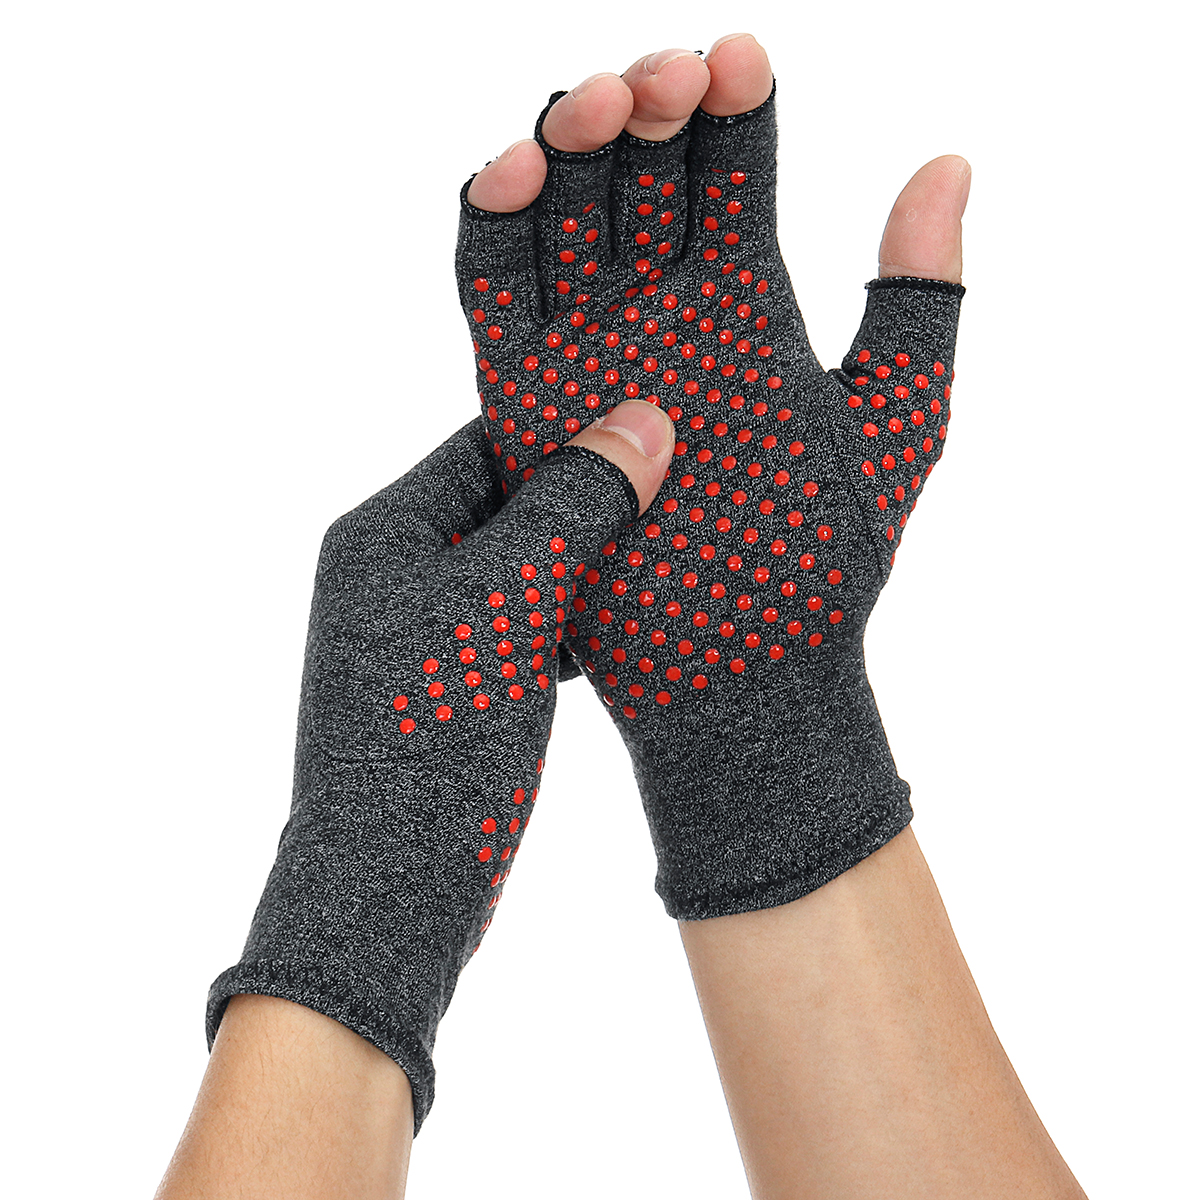 1-Pair-Compression-Arthritis-Gloves-Arthritic-Joint-Pain-Relief-Hand-Gloves-Therapy-Open-Fingers-Com-1777634-1